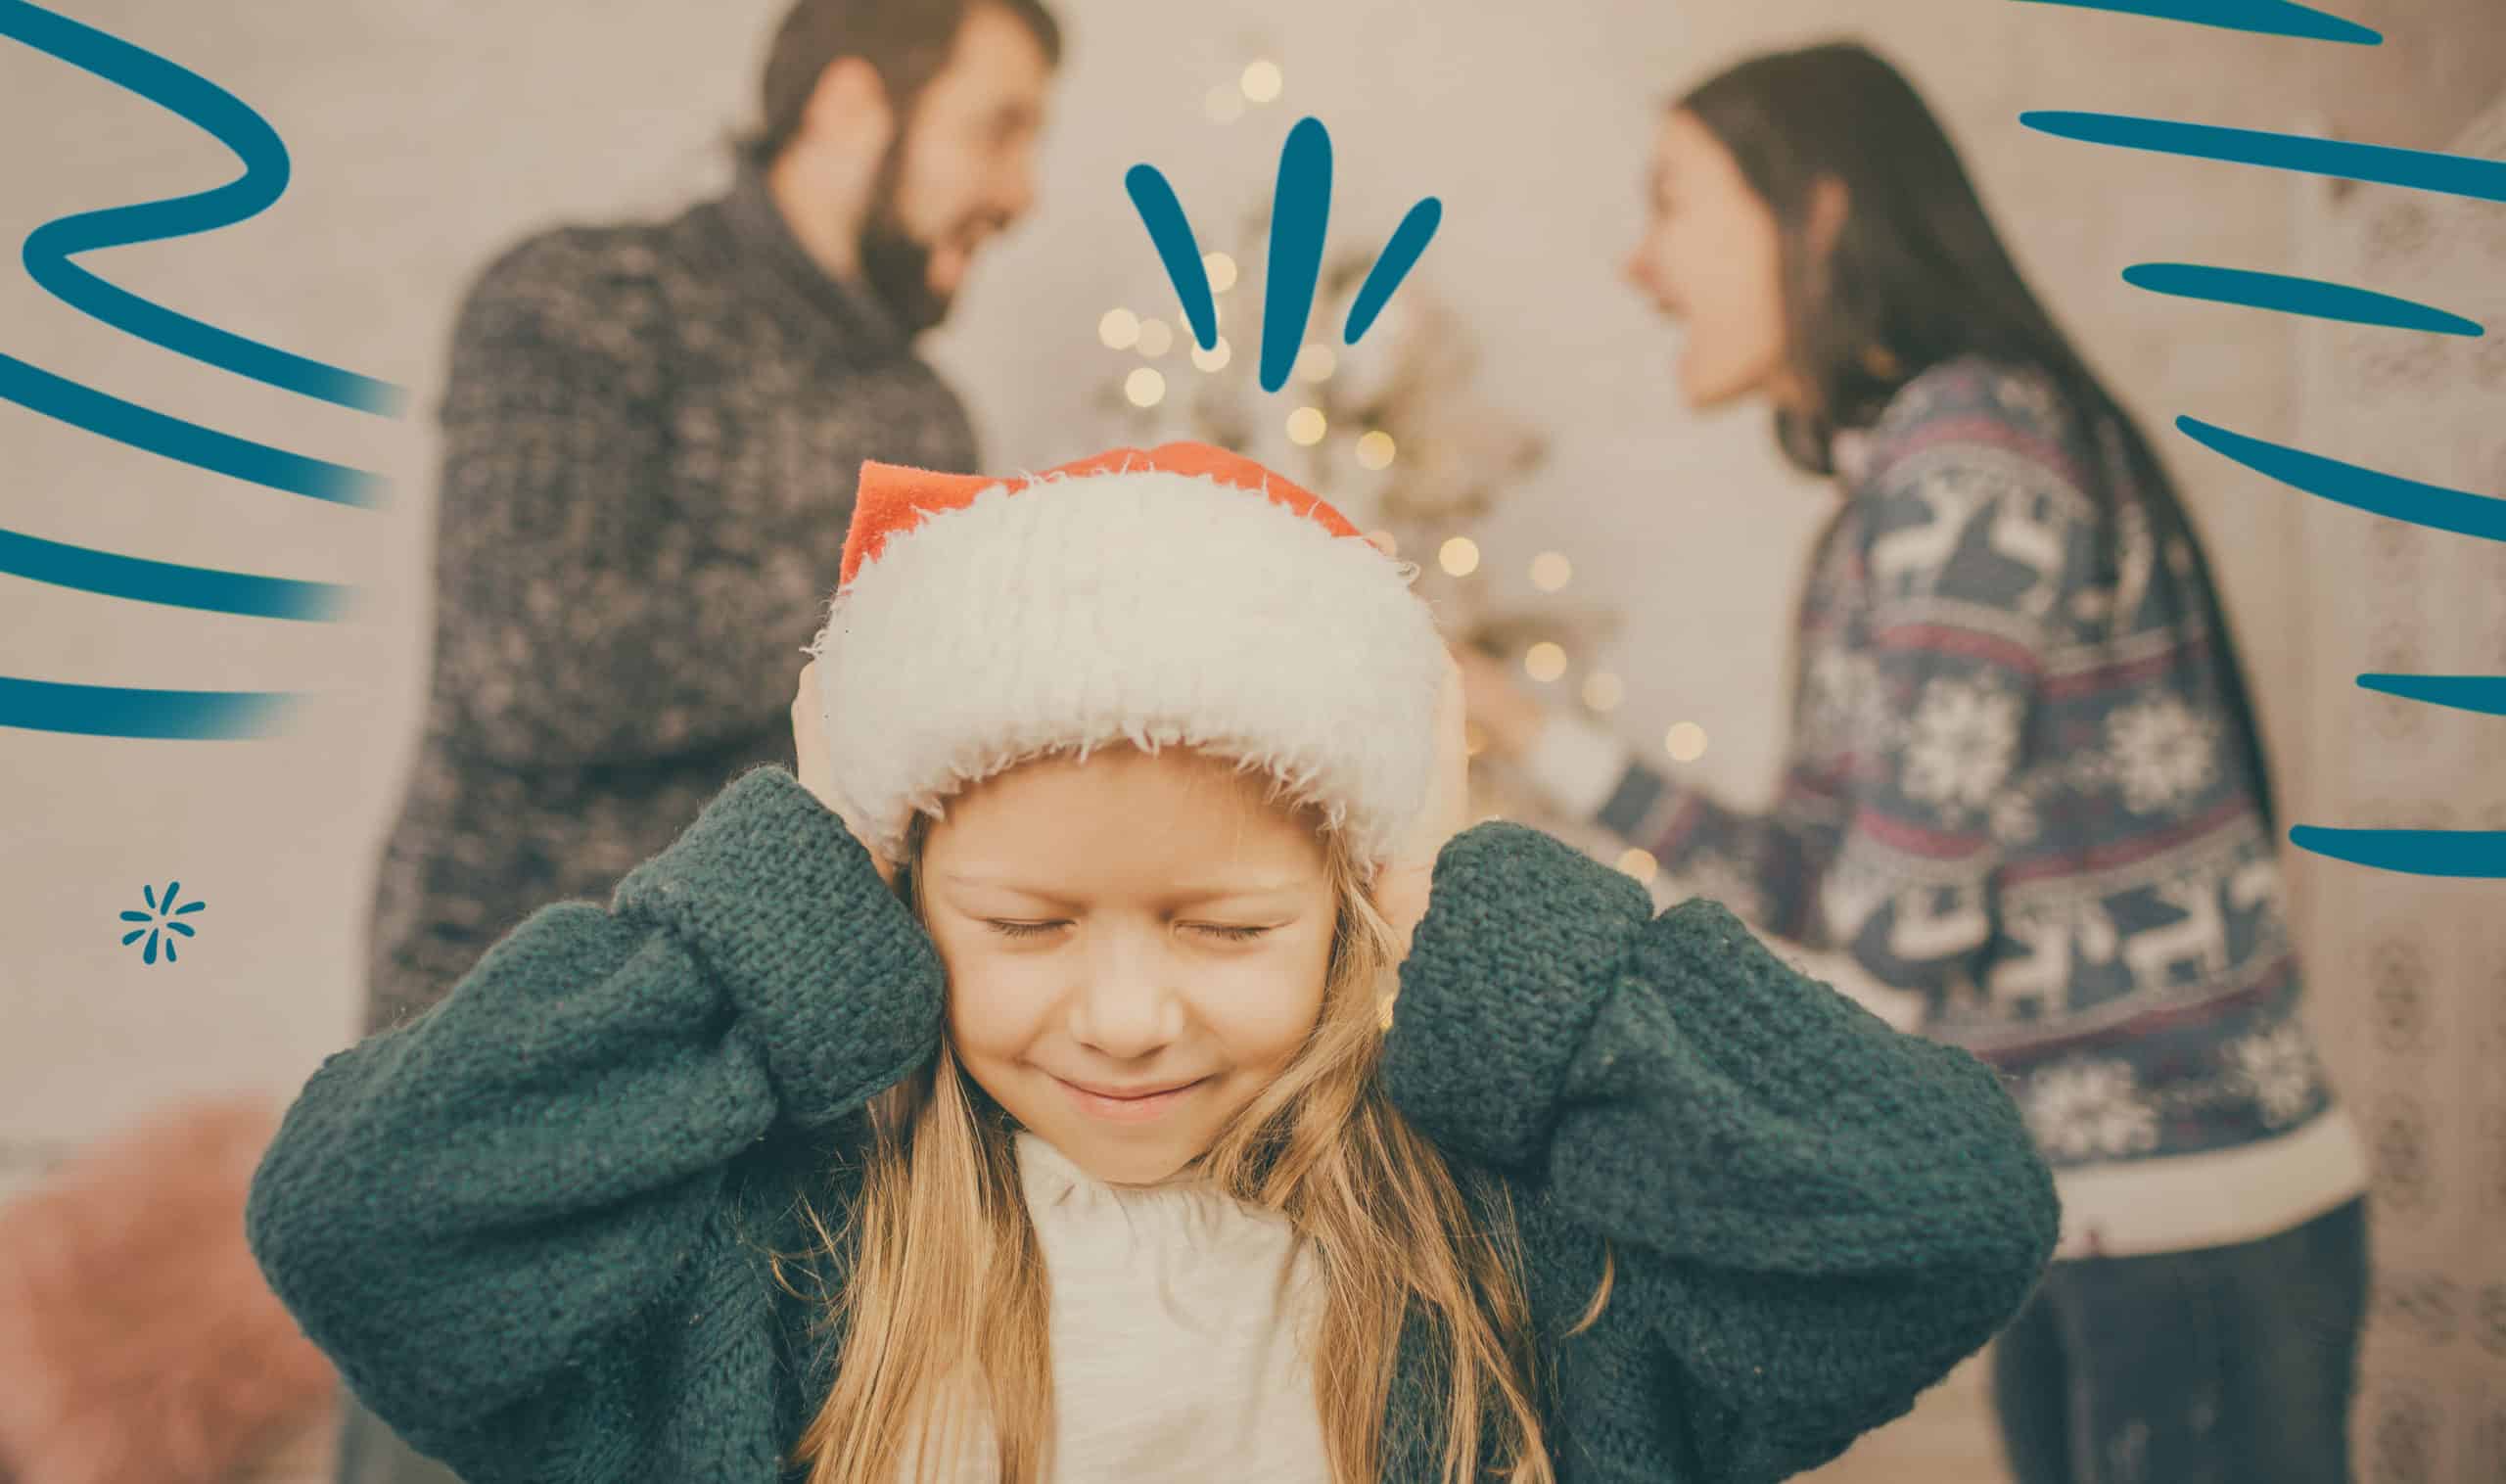 Cleaning Up Your Expectations for Christmas - Moms In Prayer